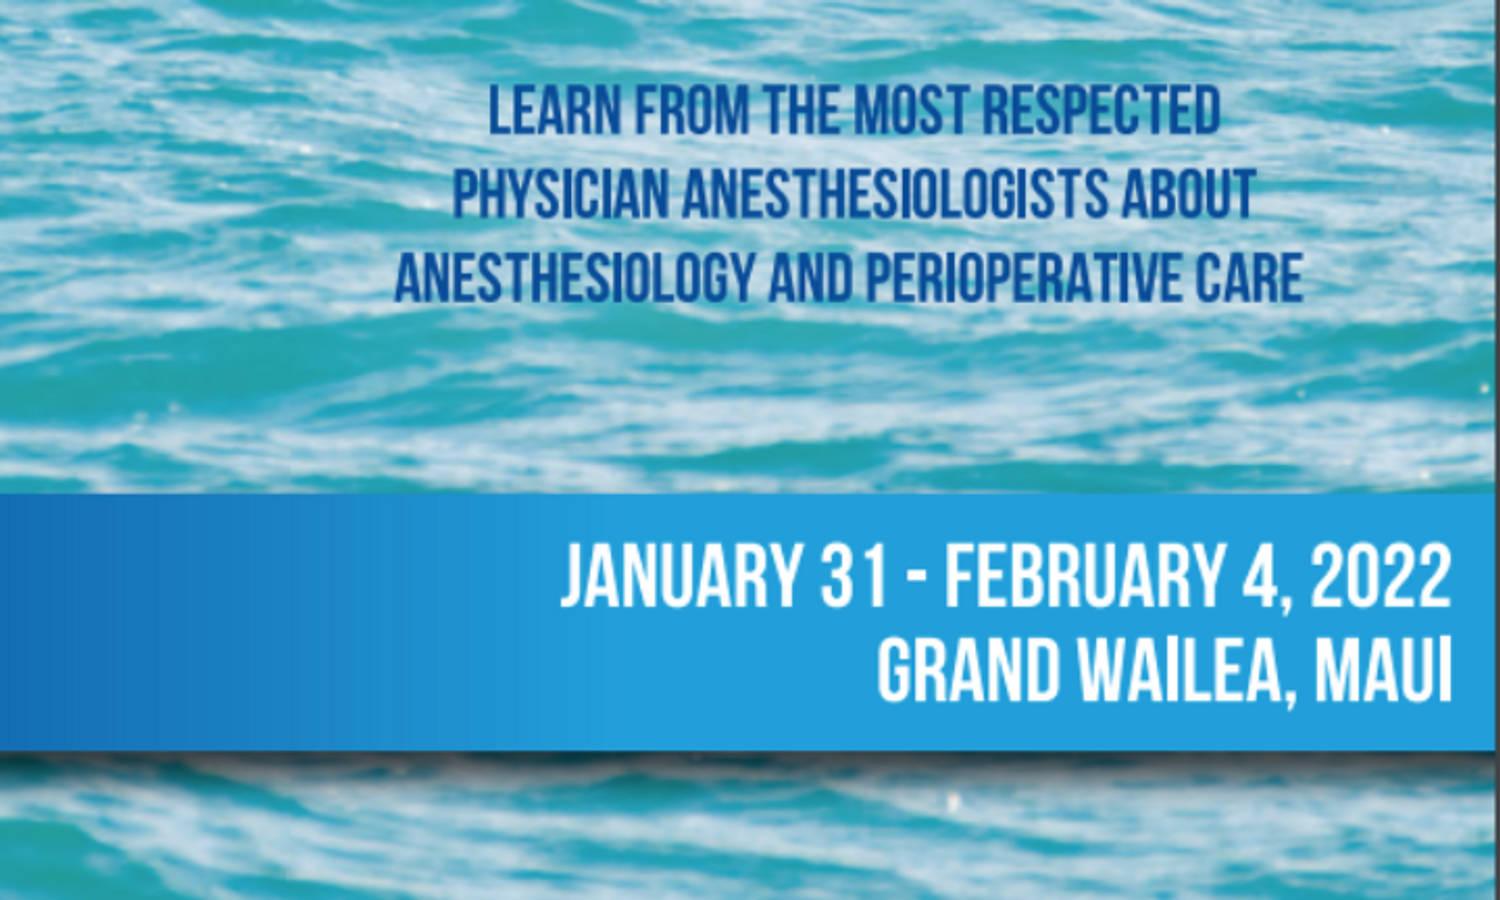 California Society of Anesthesiologists (CSA) 2022 Winter Meeting